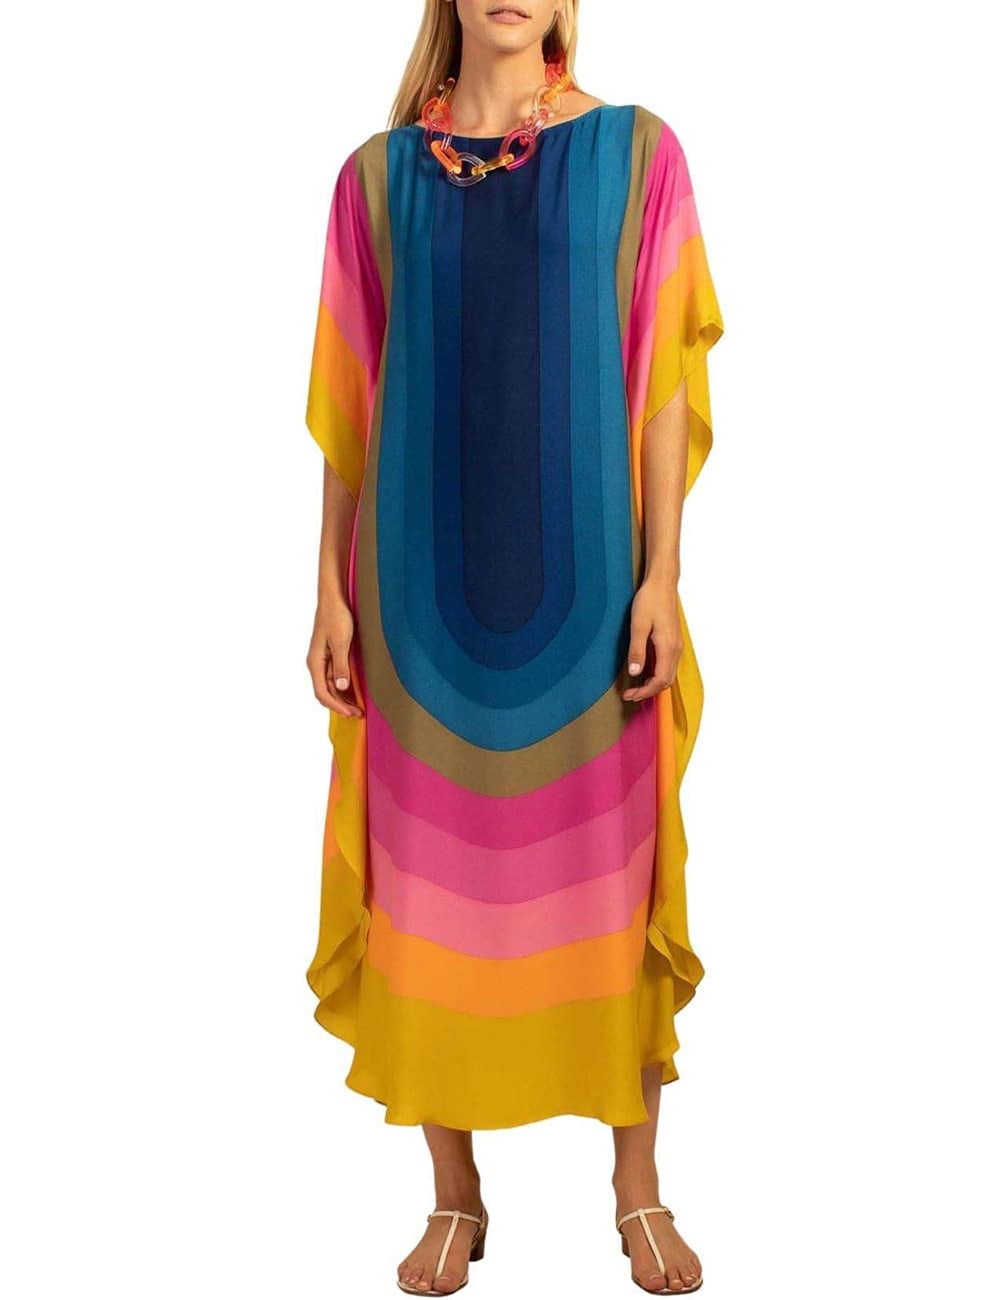 Bsubseach Colorful Kaftan Dresses for Women Long Bathing Suit Cover ups ...